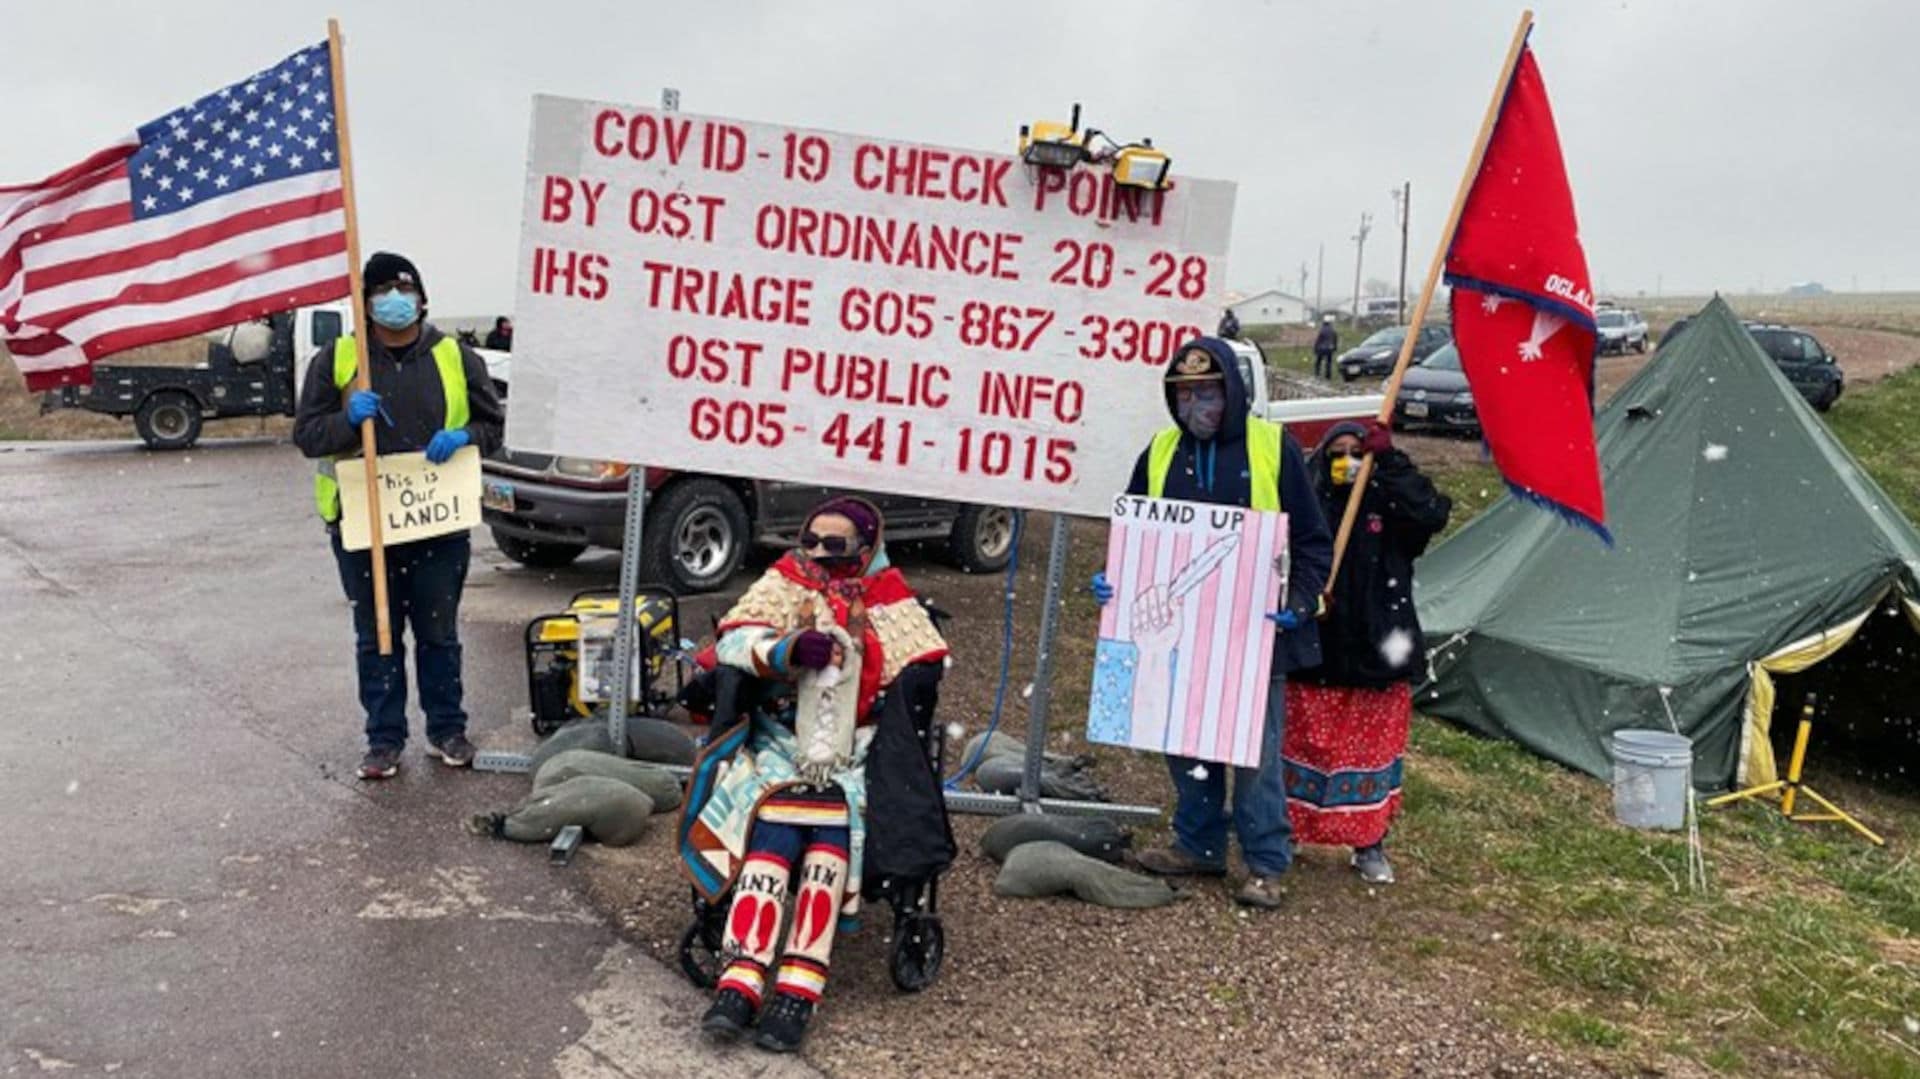 Oglala Lakota Tribal Member Emma Waters, 89, sits between Pine Ridge Reservation border patrol workers and her daughter in support of Covid-19 checkpoints operated by the Cheyenne River Sioux and Oglala Sioux tribes.